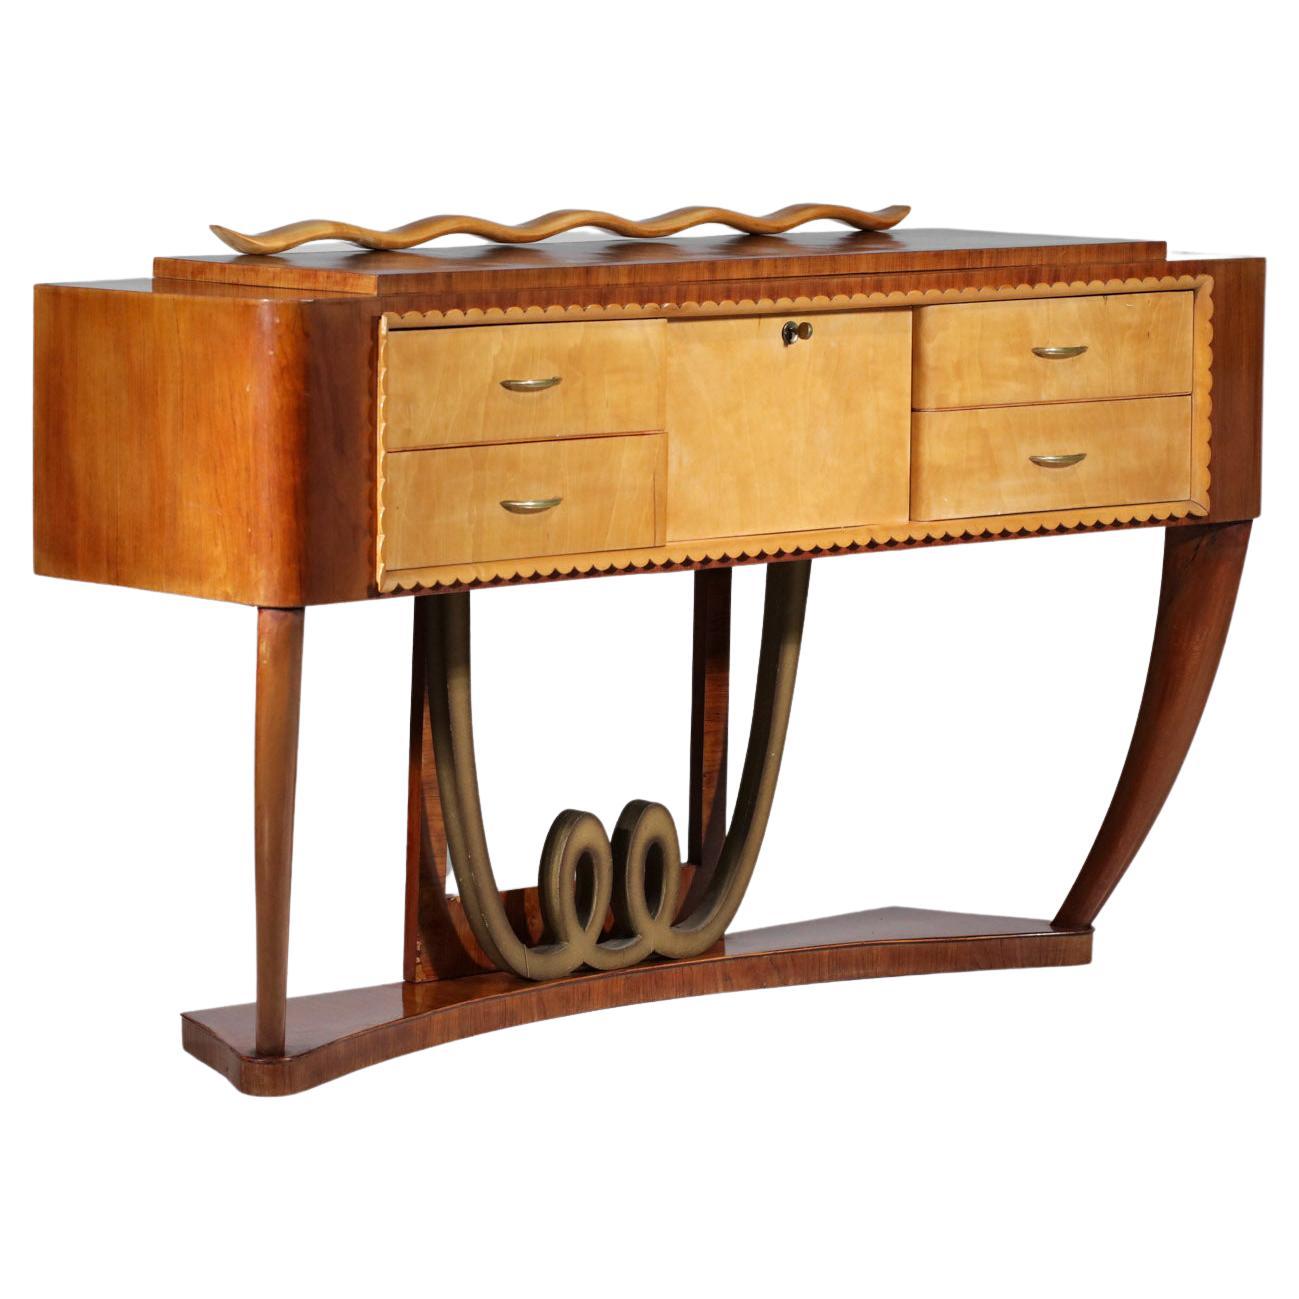 Italian sideboard from the 60's very decorative in the taste of Paolo Buffa or Gio Ponti's work. The set is made of different types of wood, veneered or solid. This sideboard has four drawers and a central door. Very nice details on the base, the